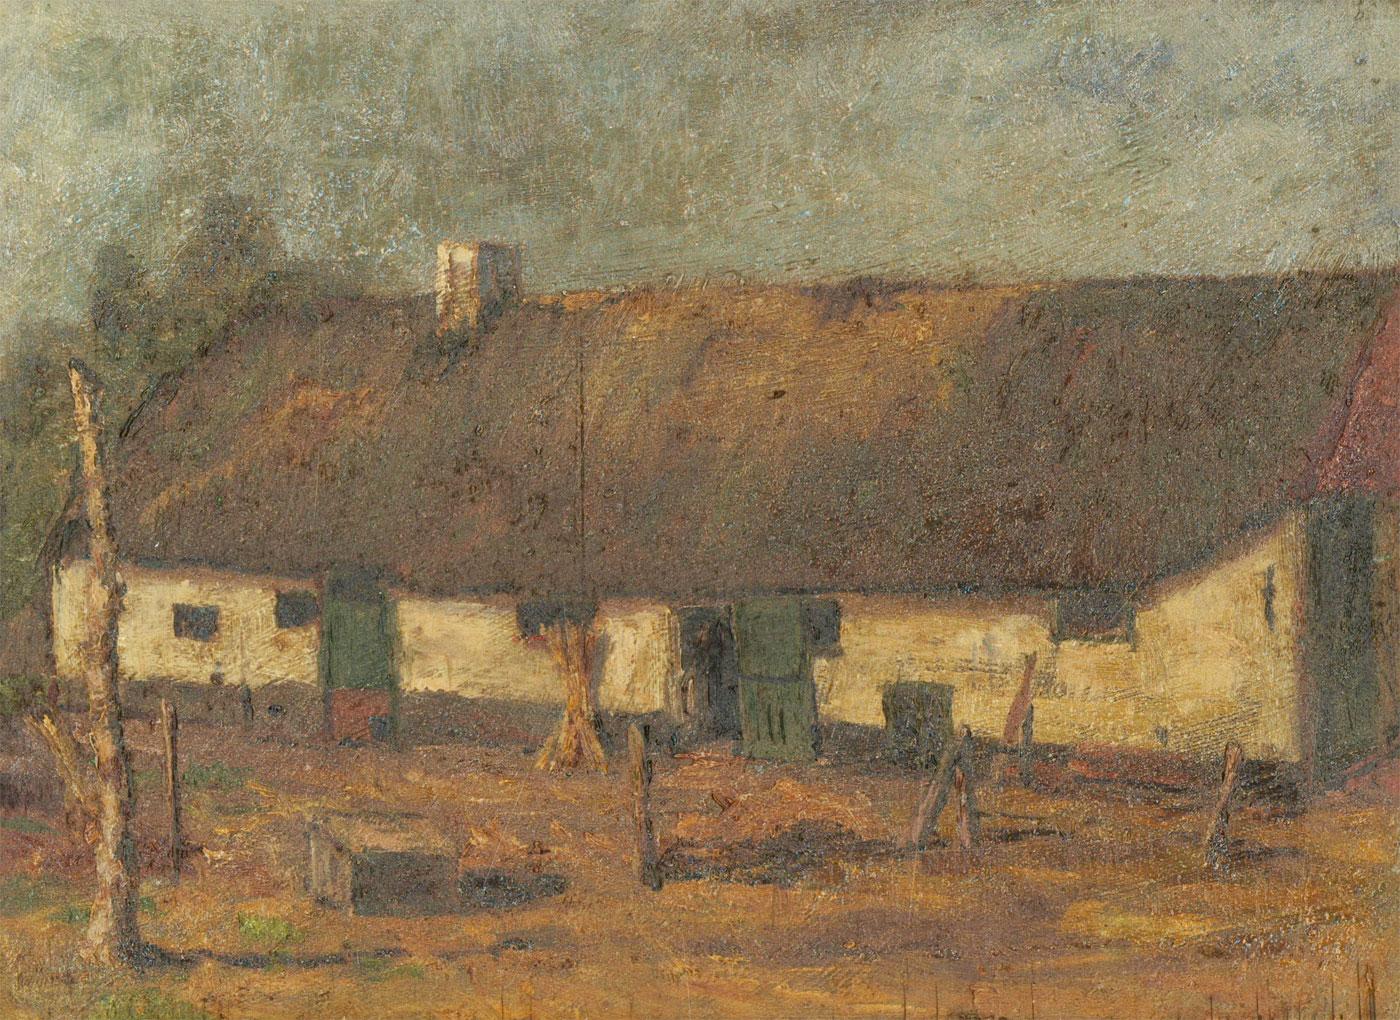 Framed 1948 Oil - Belgian Farmhouse - Painting by Unknown